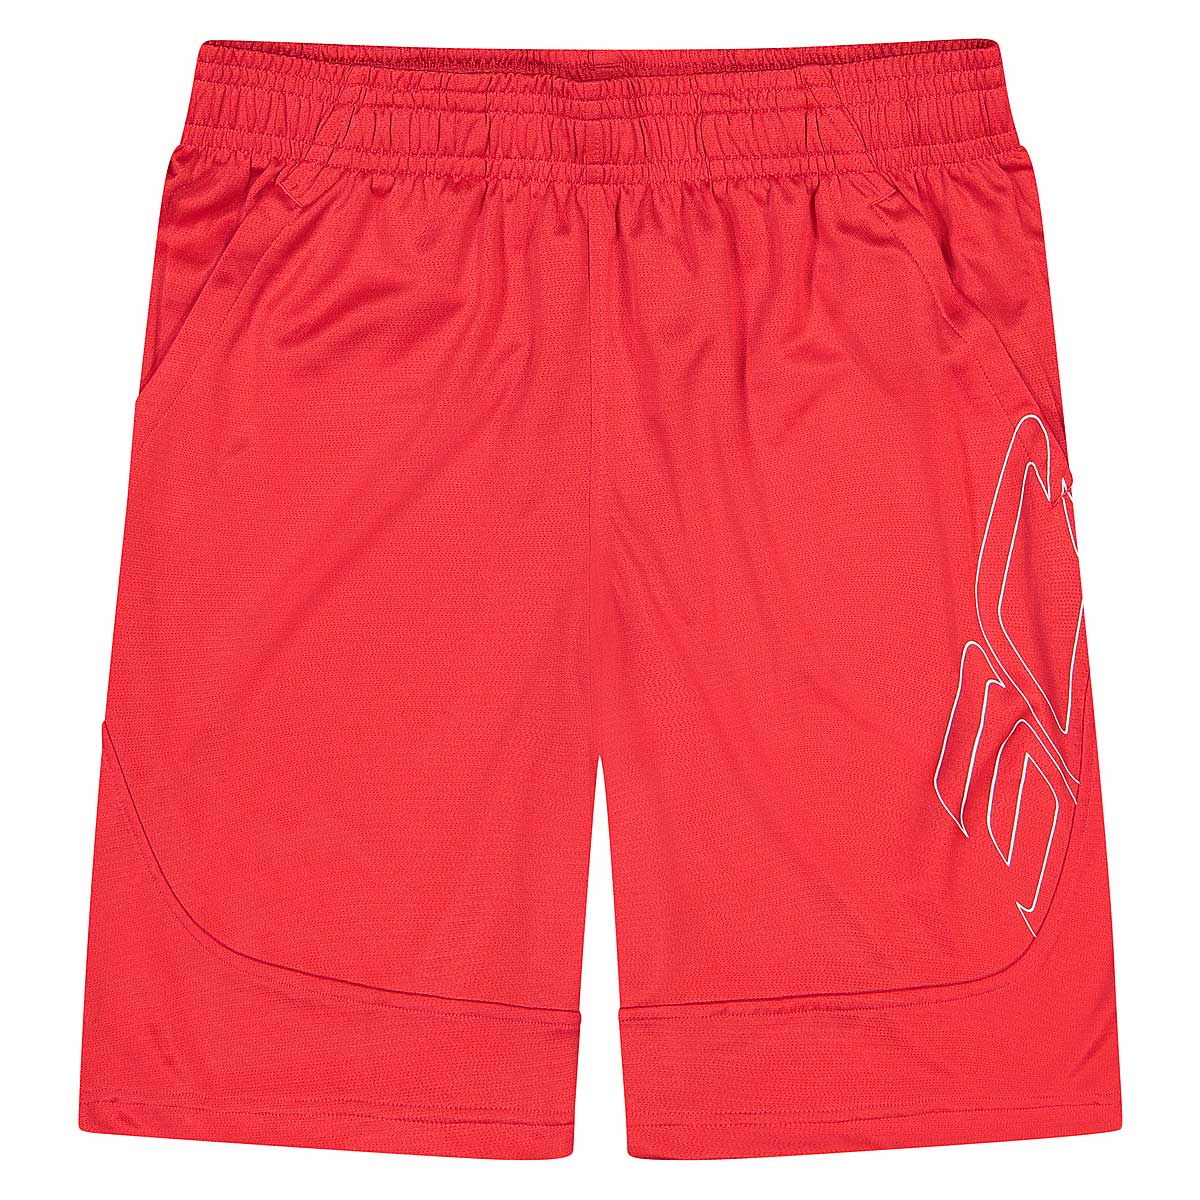 Buy CURRY UNDERRATED SHORTS for N/A 0.0 on KICKZ.com!